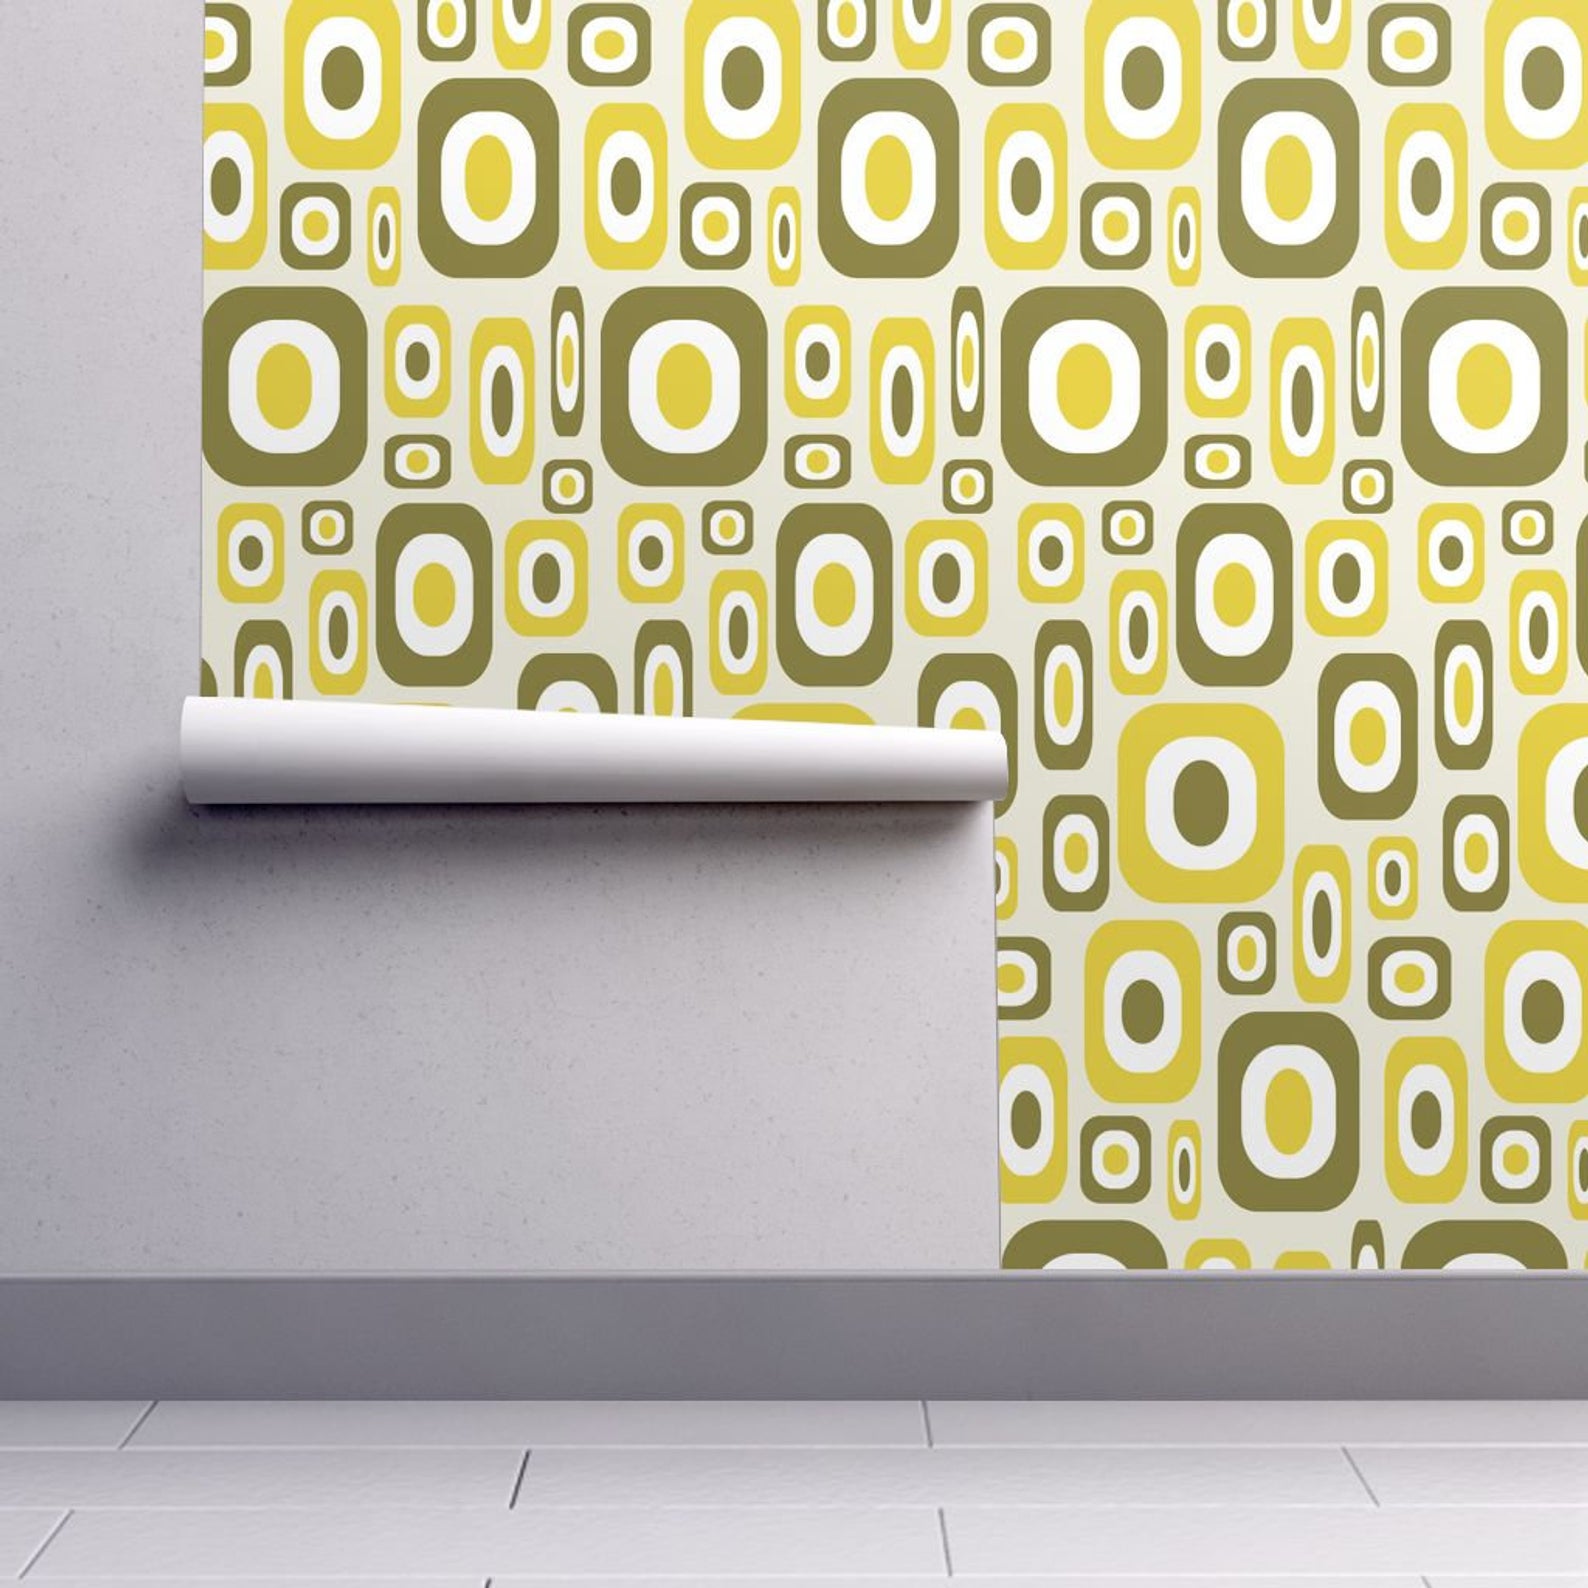 4. Mid Century Modern Wallpaper - Olive Mod By Jjtrends - Olive Yellow Custom Printed Removable Self Adhesive Wallpaper 